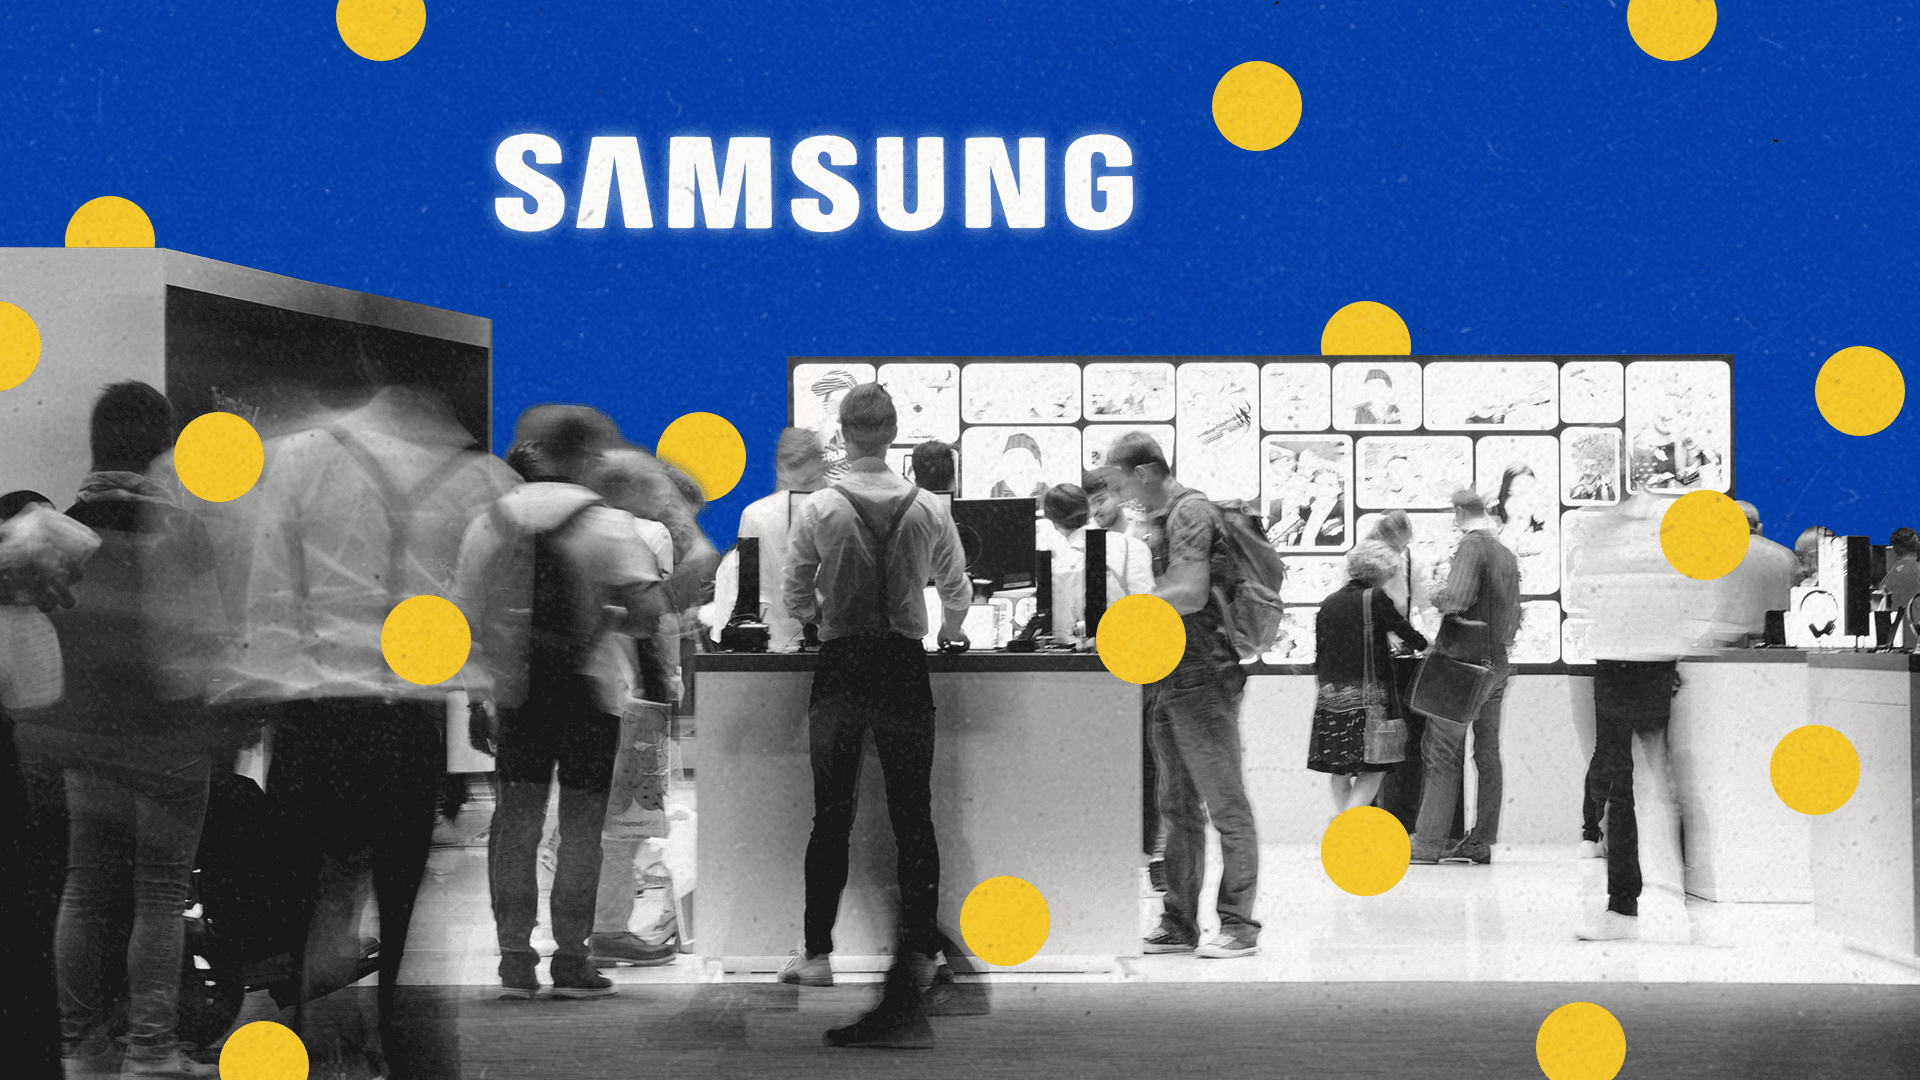 Samsung is the fourth largest advertiser in the world. Here’s why it’s betting on outcome-based marketing with Publicis Media.